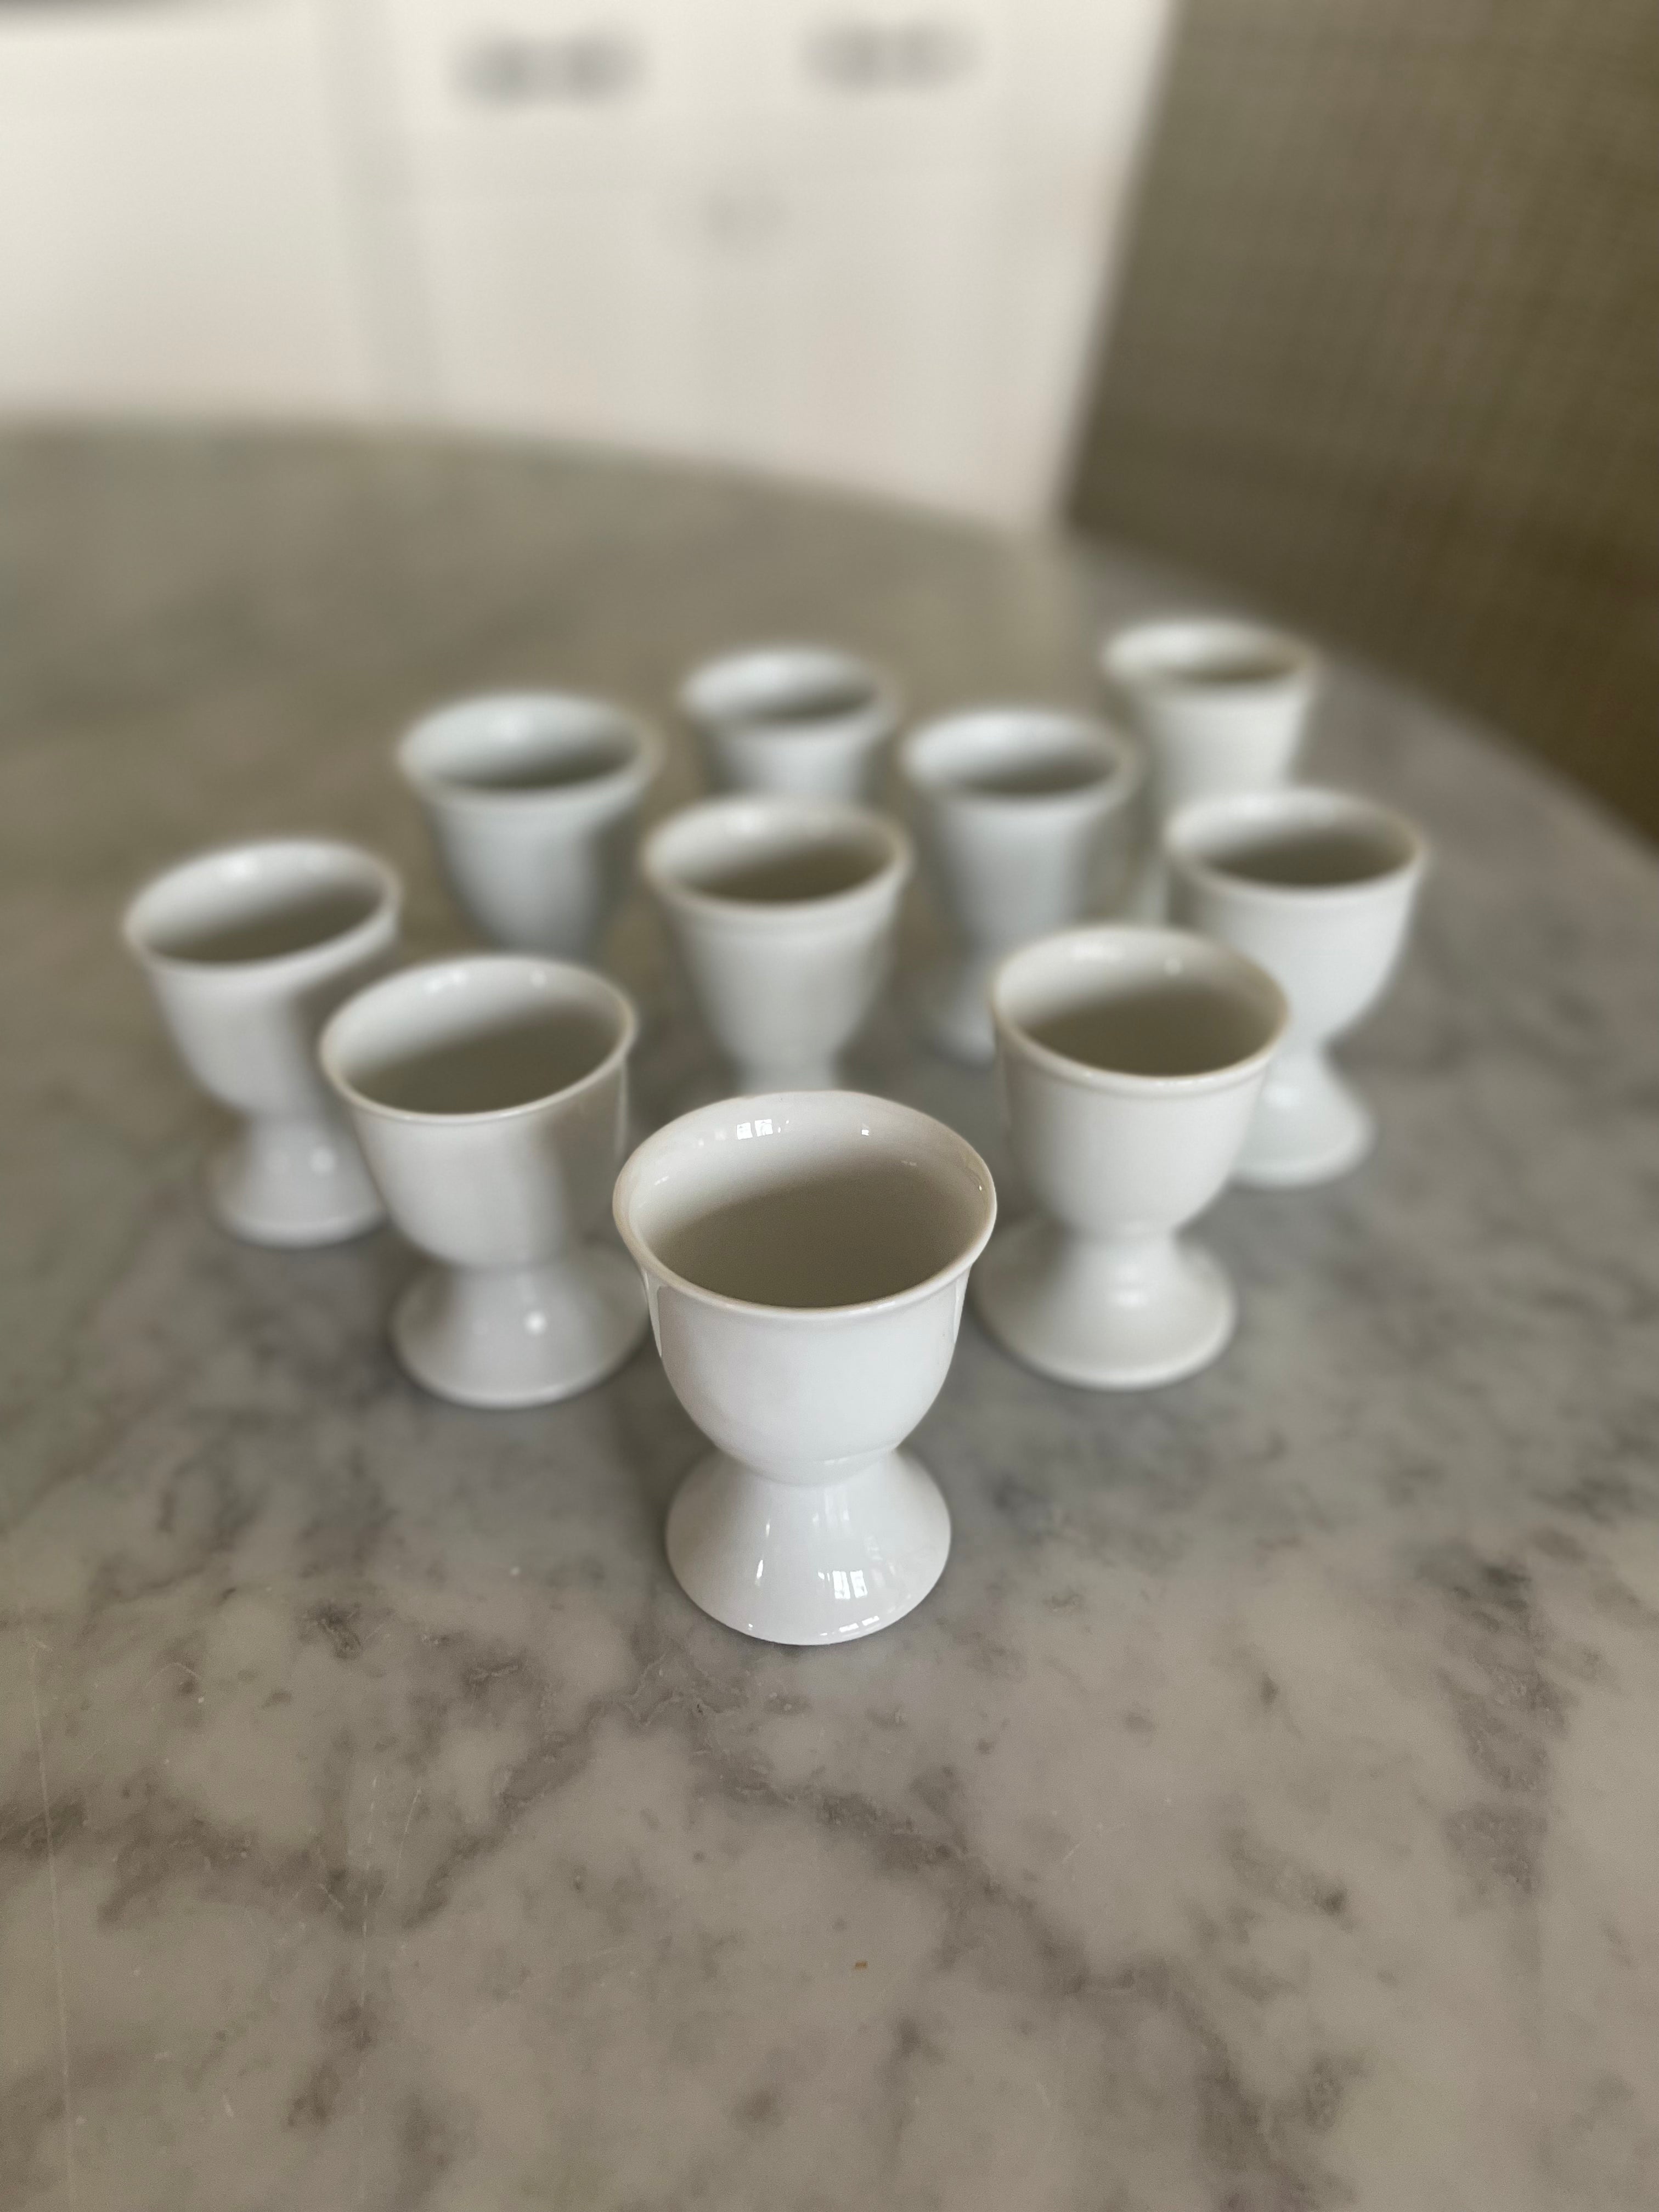 Porcelain Egg Cup There's no better way to serve soft-boiled eggs than in this classic egg cup